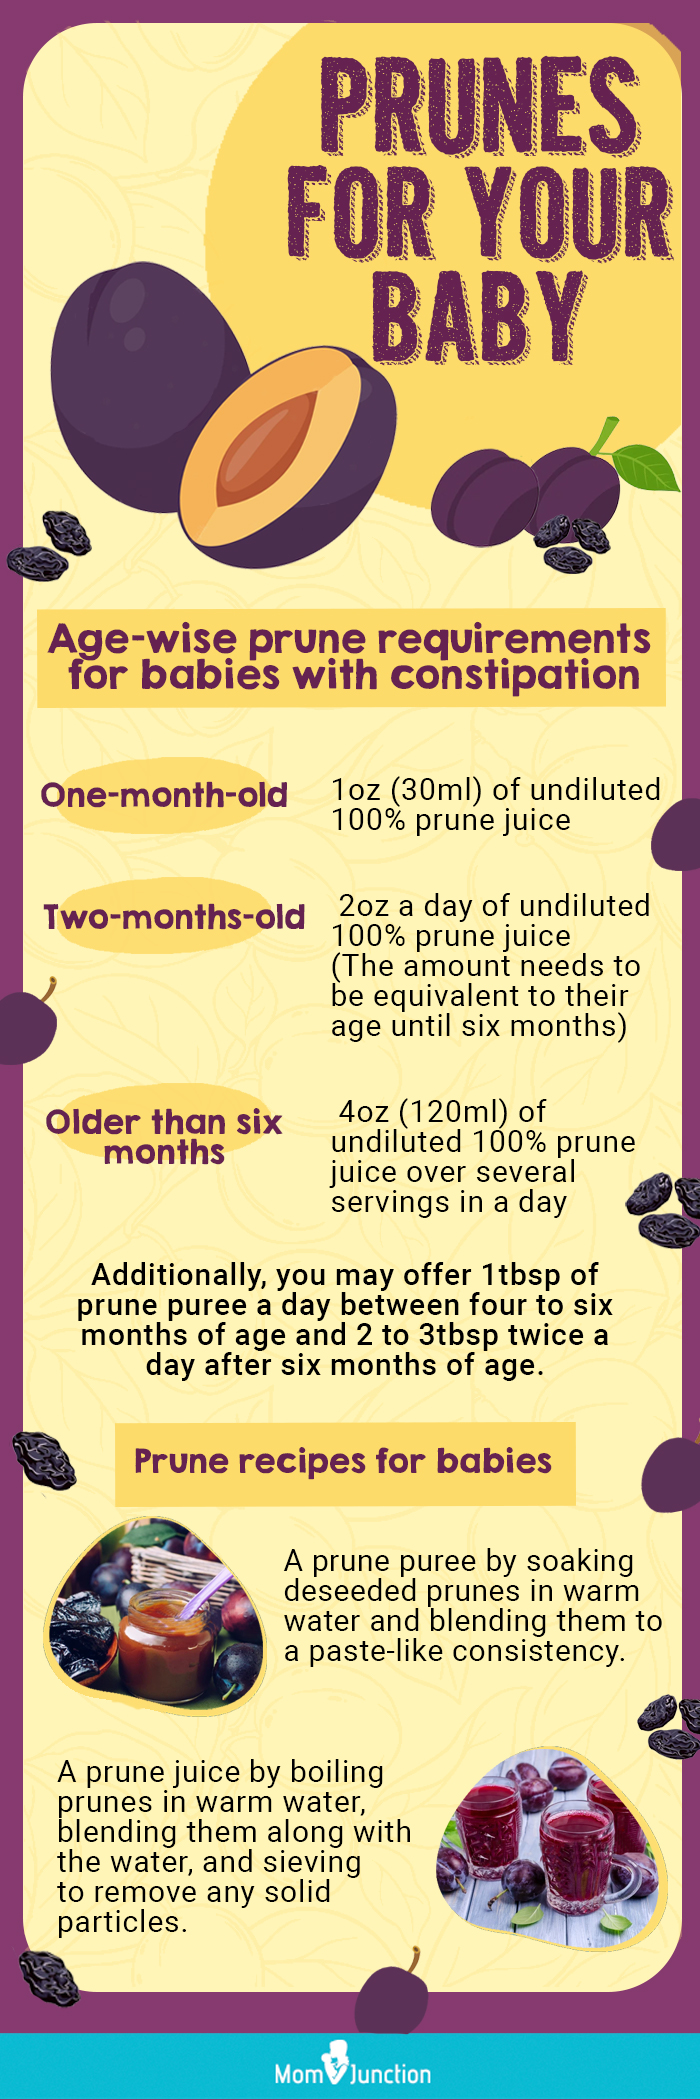 prunes for your baby [infographic]